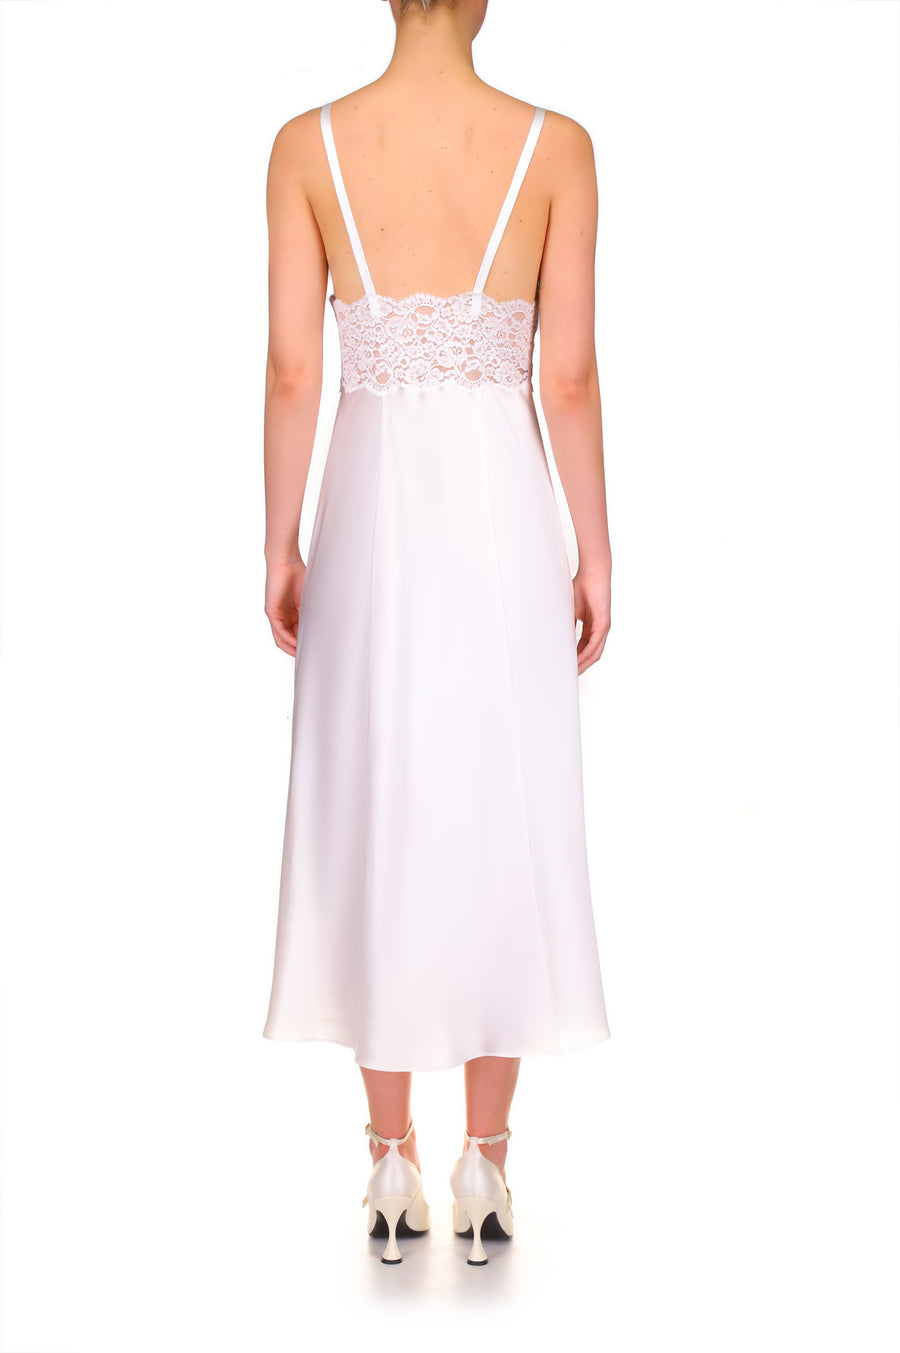 White Silk Satin And Lace Bias Slip Dress With Slit and Rose